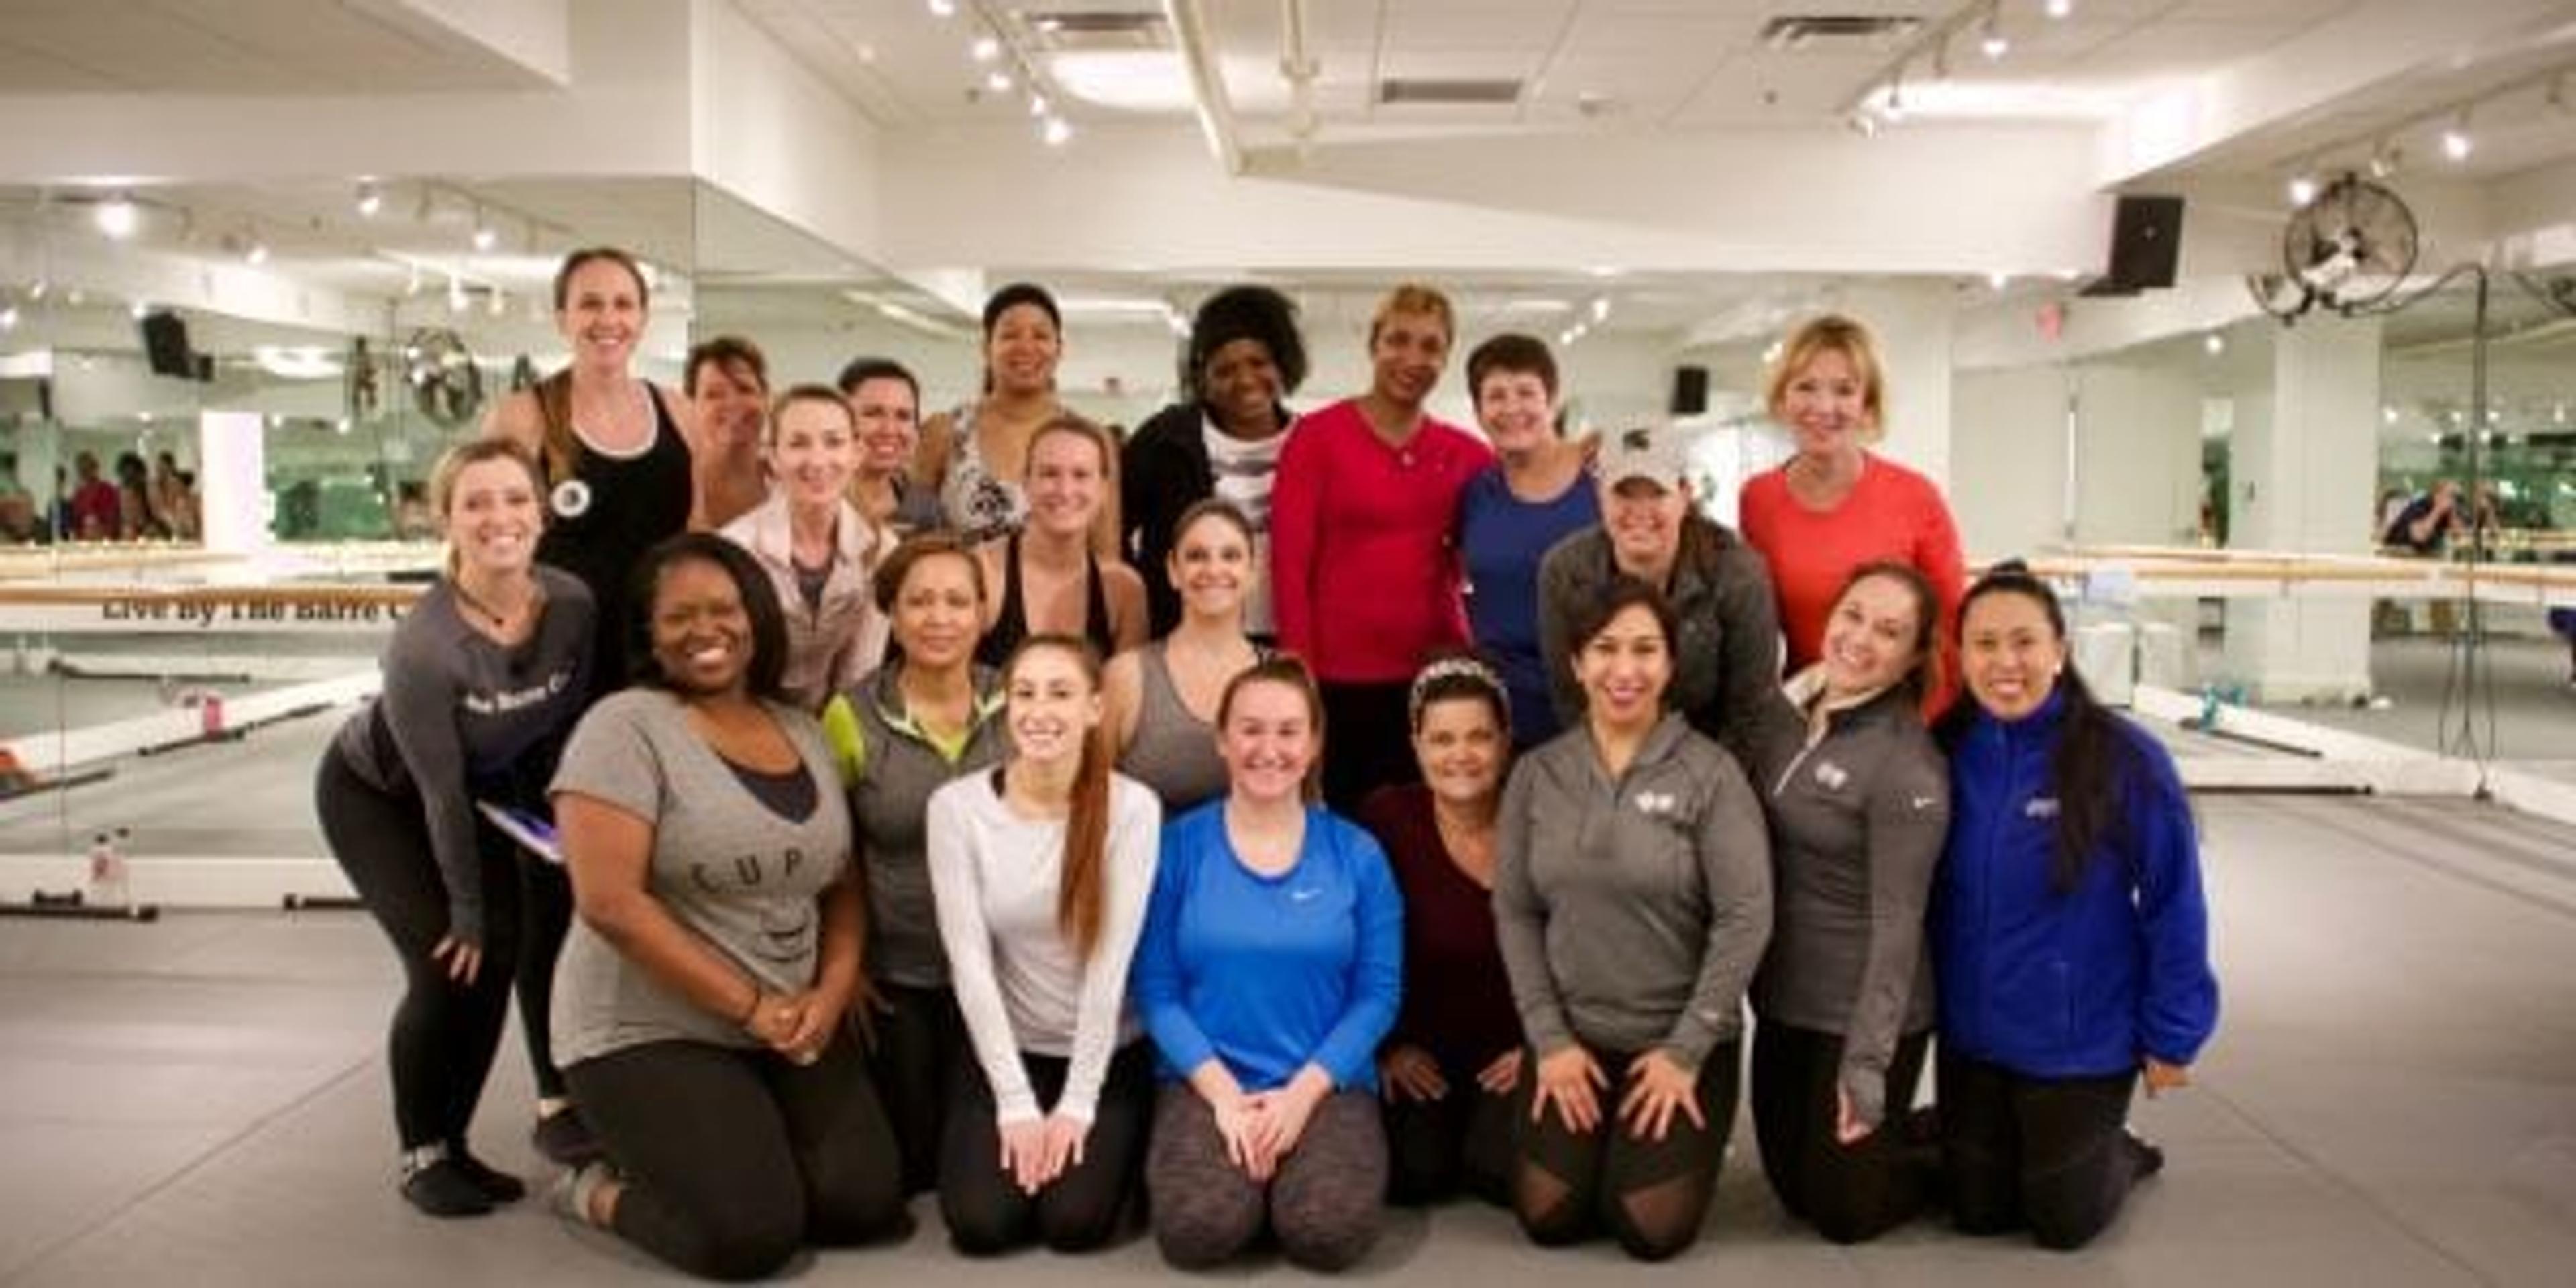 Blue Cross employees ready to take a barre class.